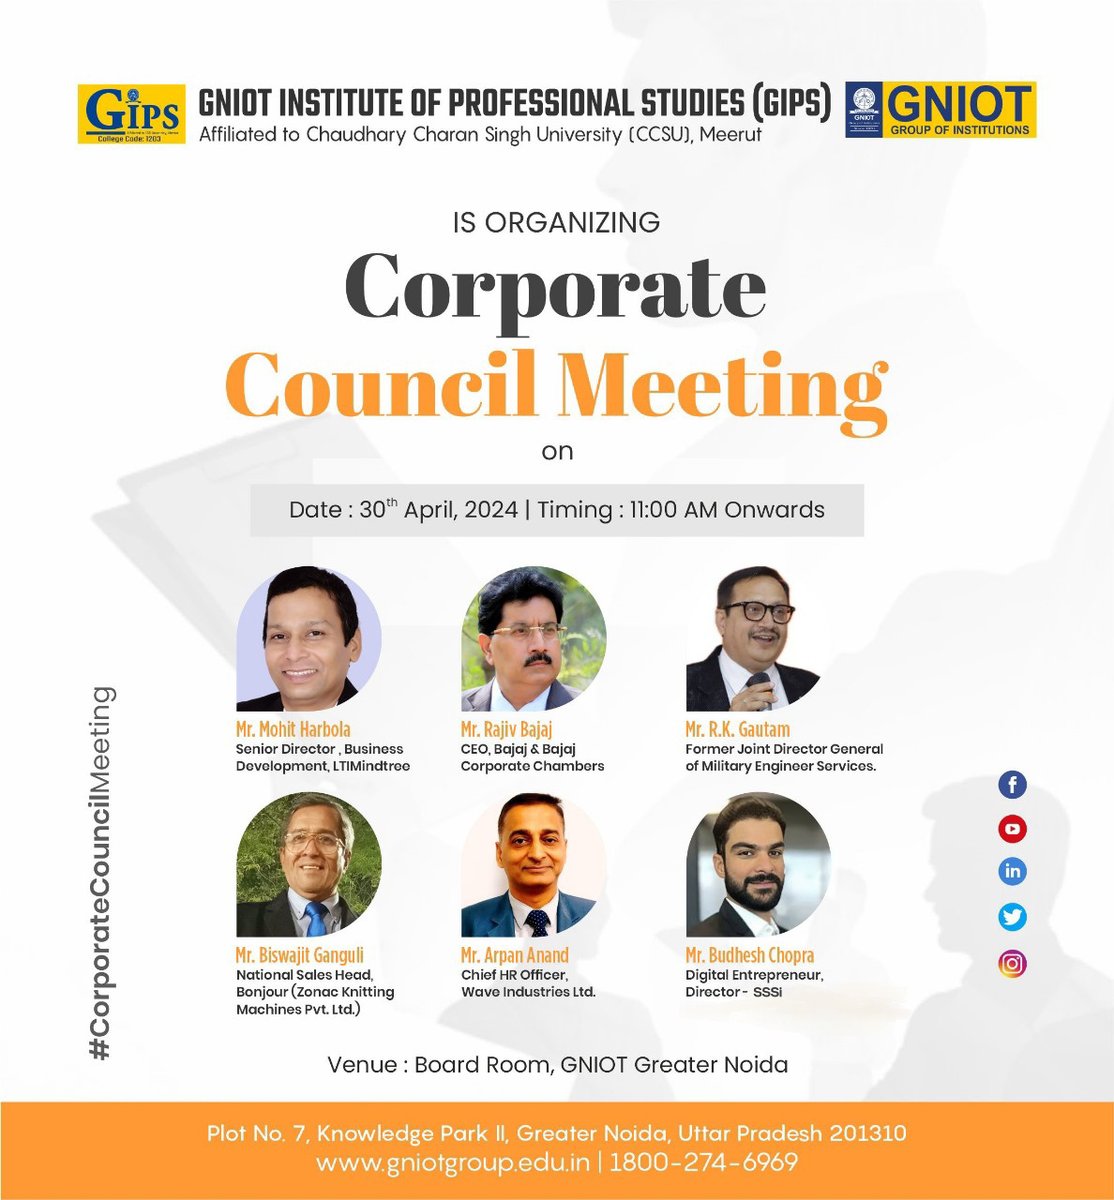 Prepping for a key academic event at GNIOT. Corporate Council Meeting  marks a milestone. Leaders shaping our future, bridging industry and  academia. Join us, shaping brighter futures! #GNIOT #GIPSExcellence  #CorporateLeadership #AcademicEnvironment #BrighterFuture